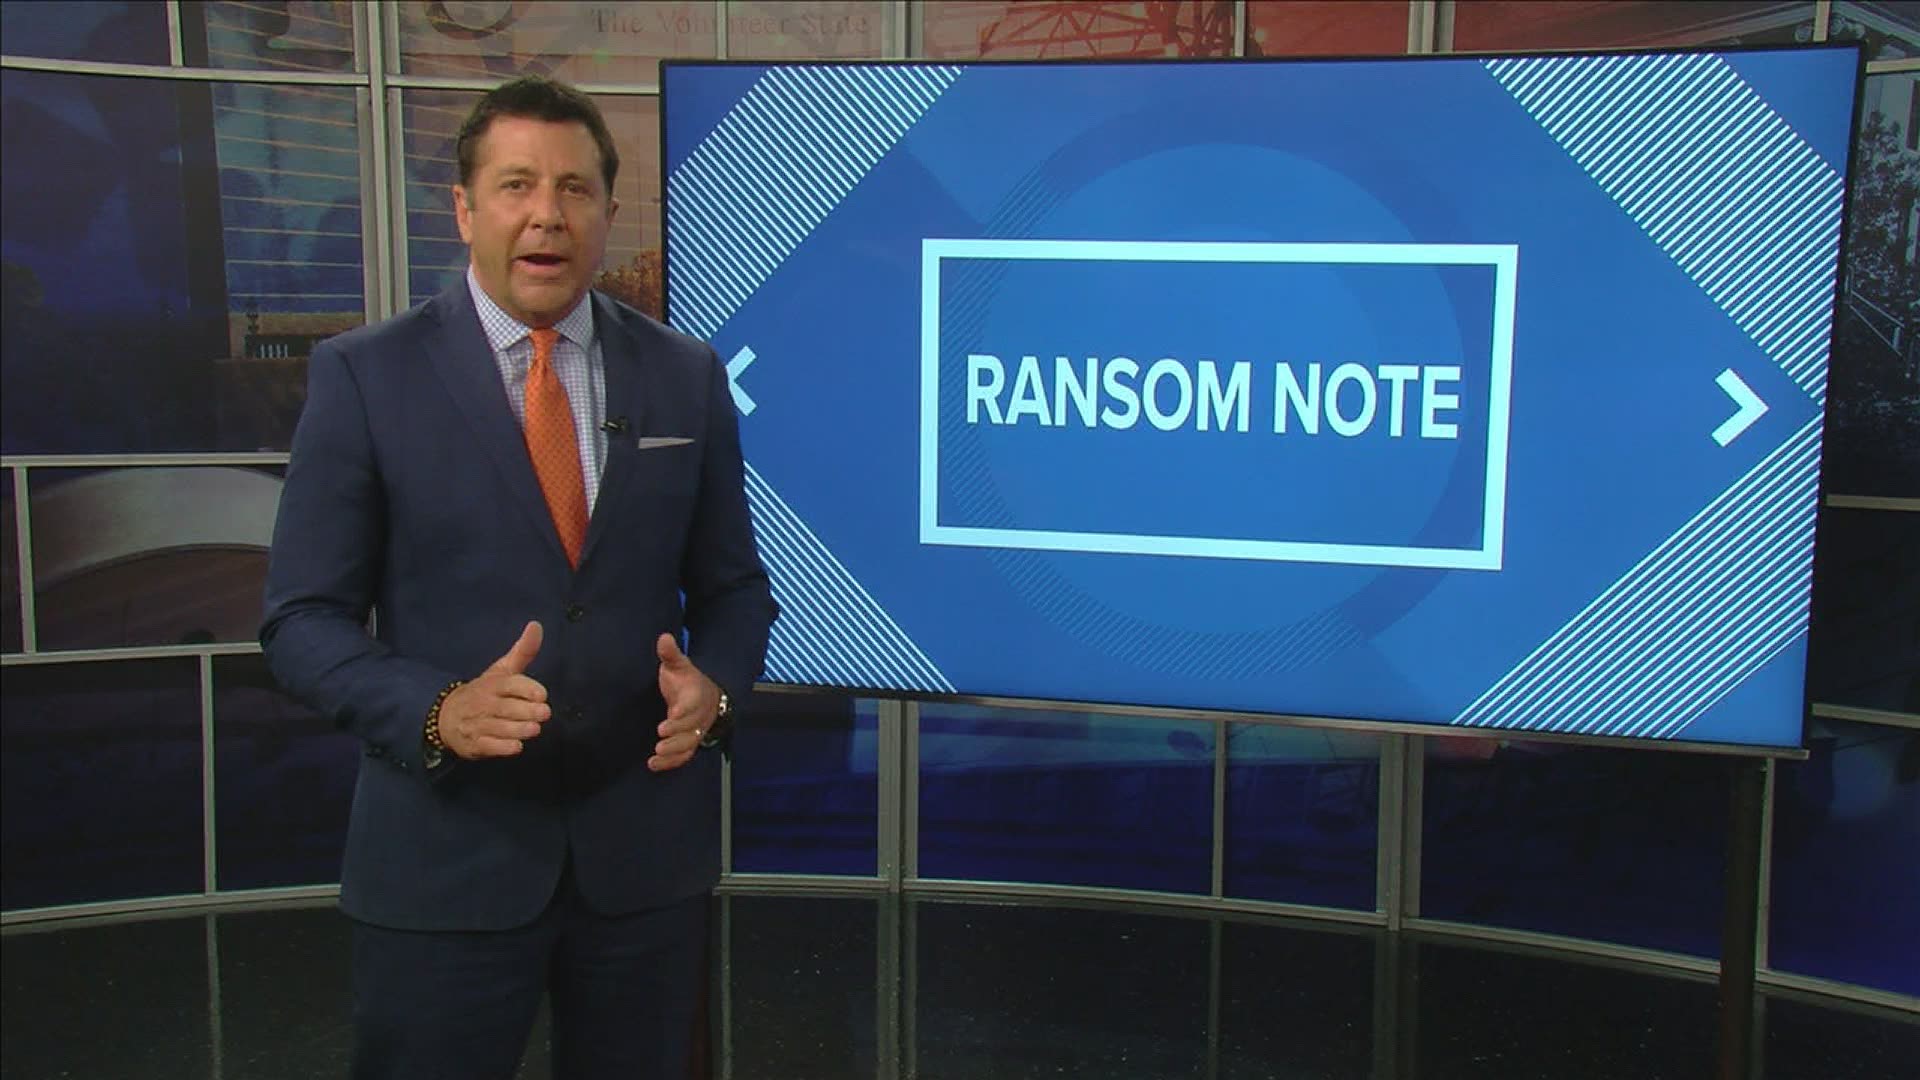 “Basically, no one's requiring us to prove we got vaccinated,” says Local 24 News anchor Richard Ransom.